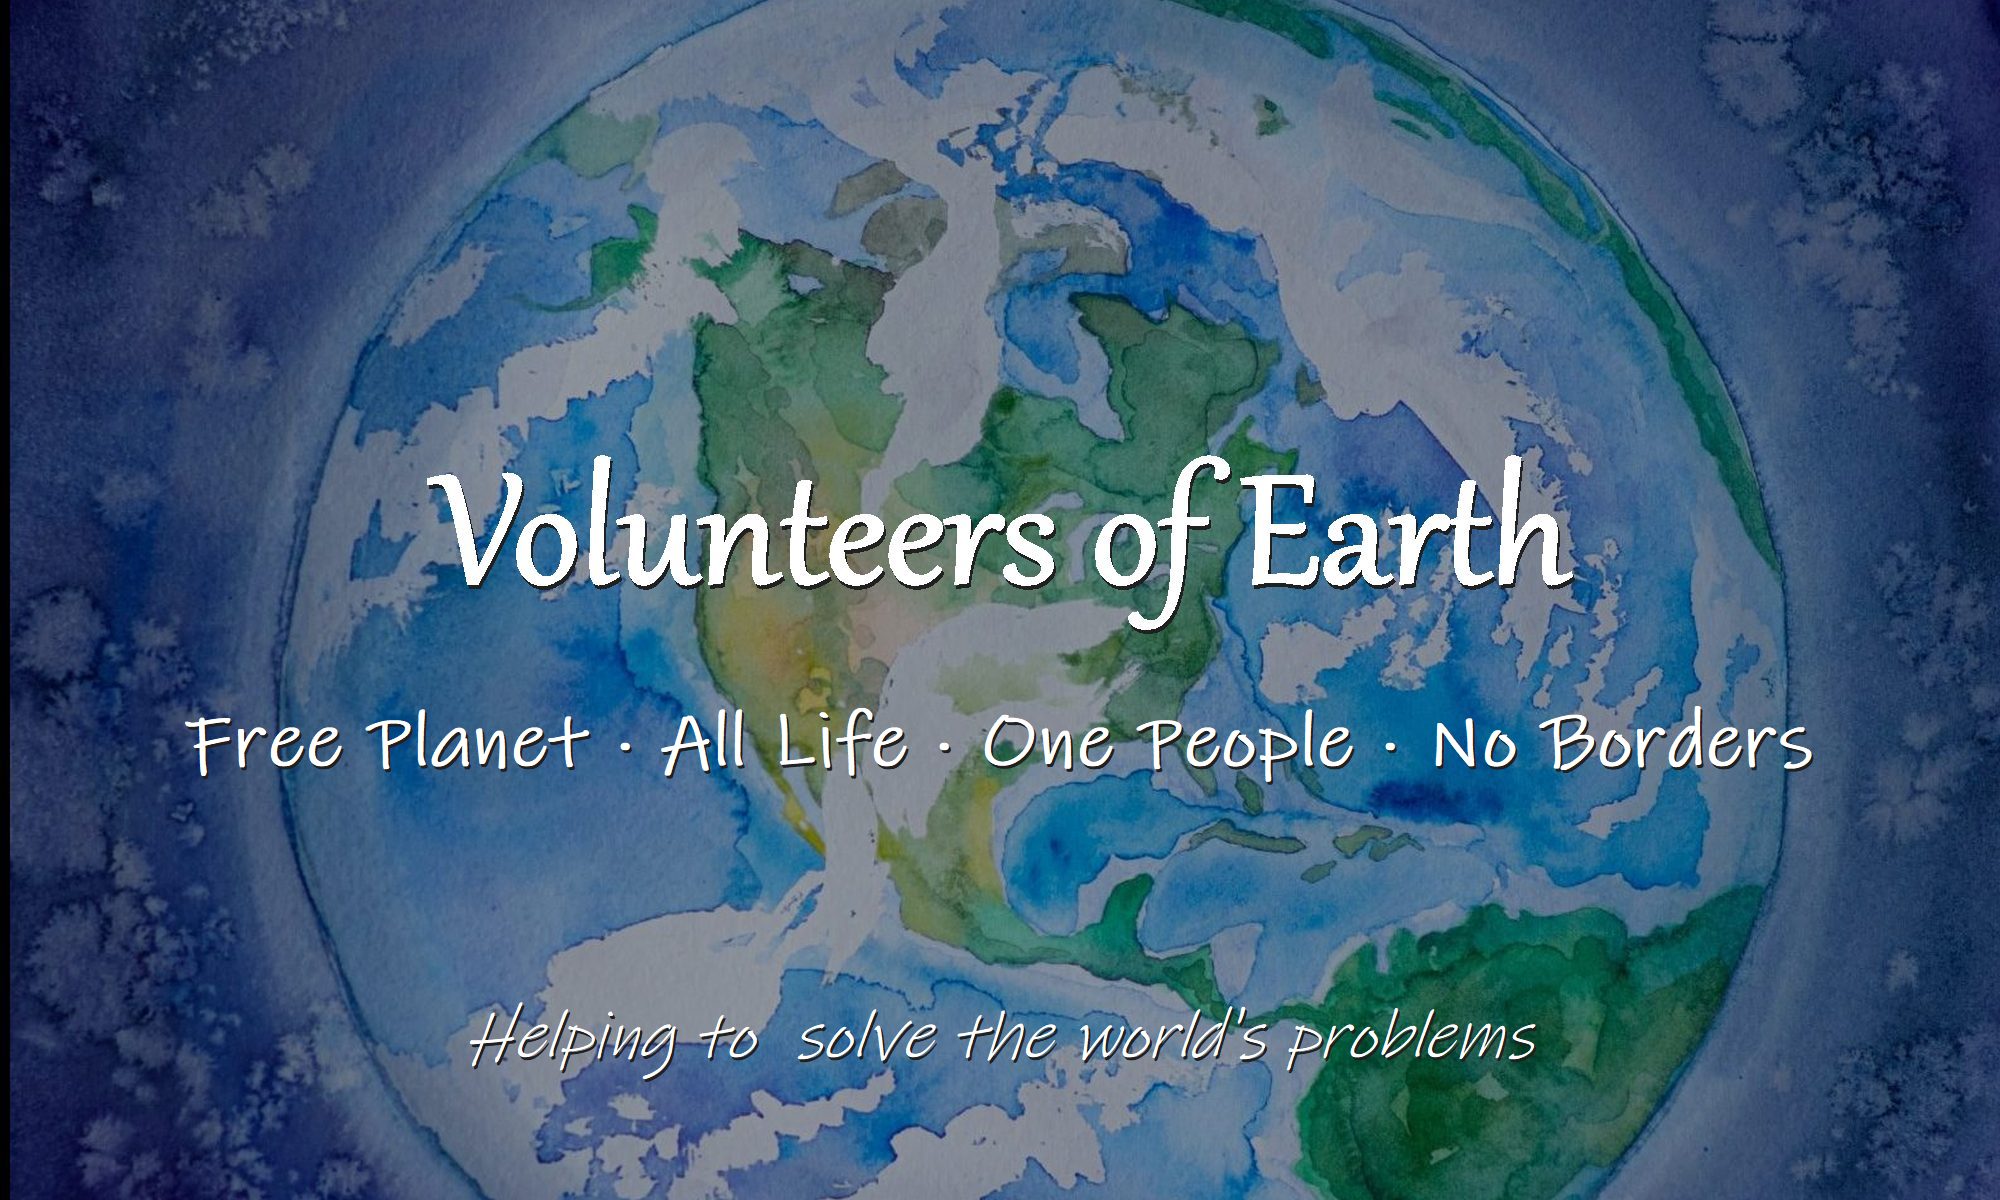 VOLUNTEERS OF EARTH! Help Solve World's Problems!